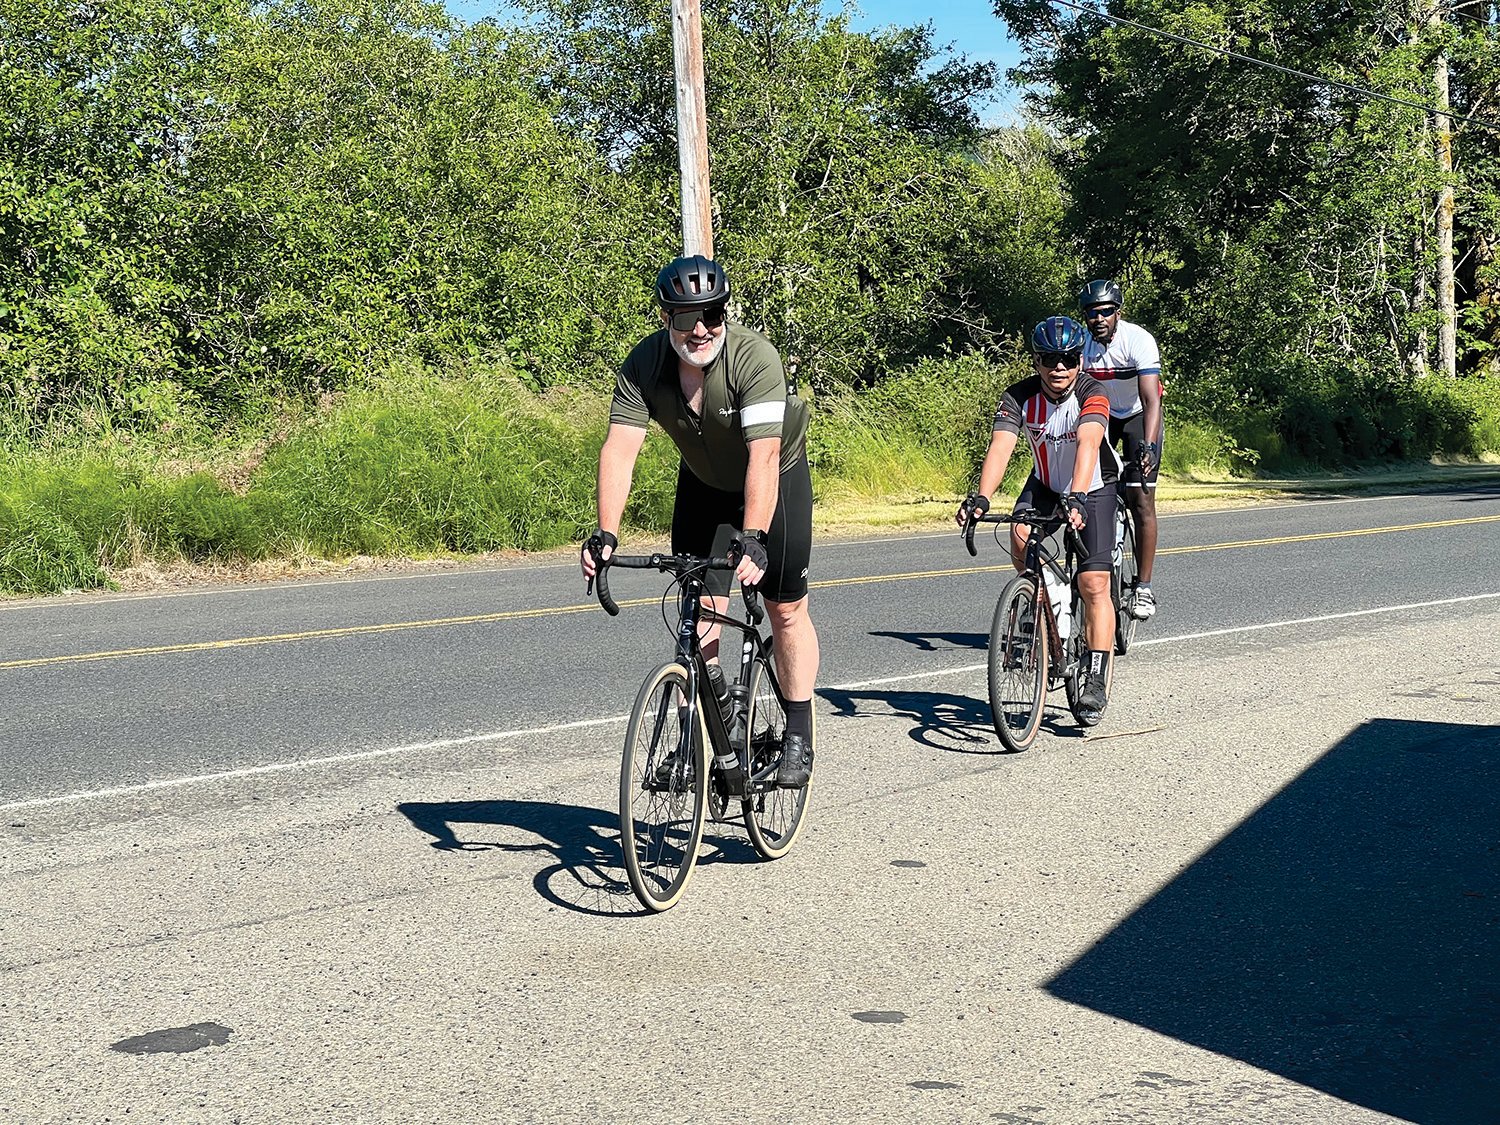 Riders pull into the Baw Faw Grange parking lot for a quick rest stop. The road course through Boistfort was new to Ride the Willapa this year, with more than 40 cyclists exploring the new route that took them to Pe Ell via Pe Ell-McDonald Road.